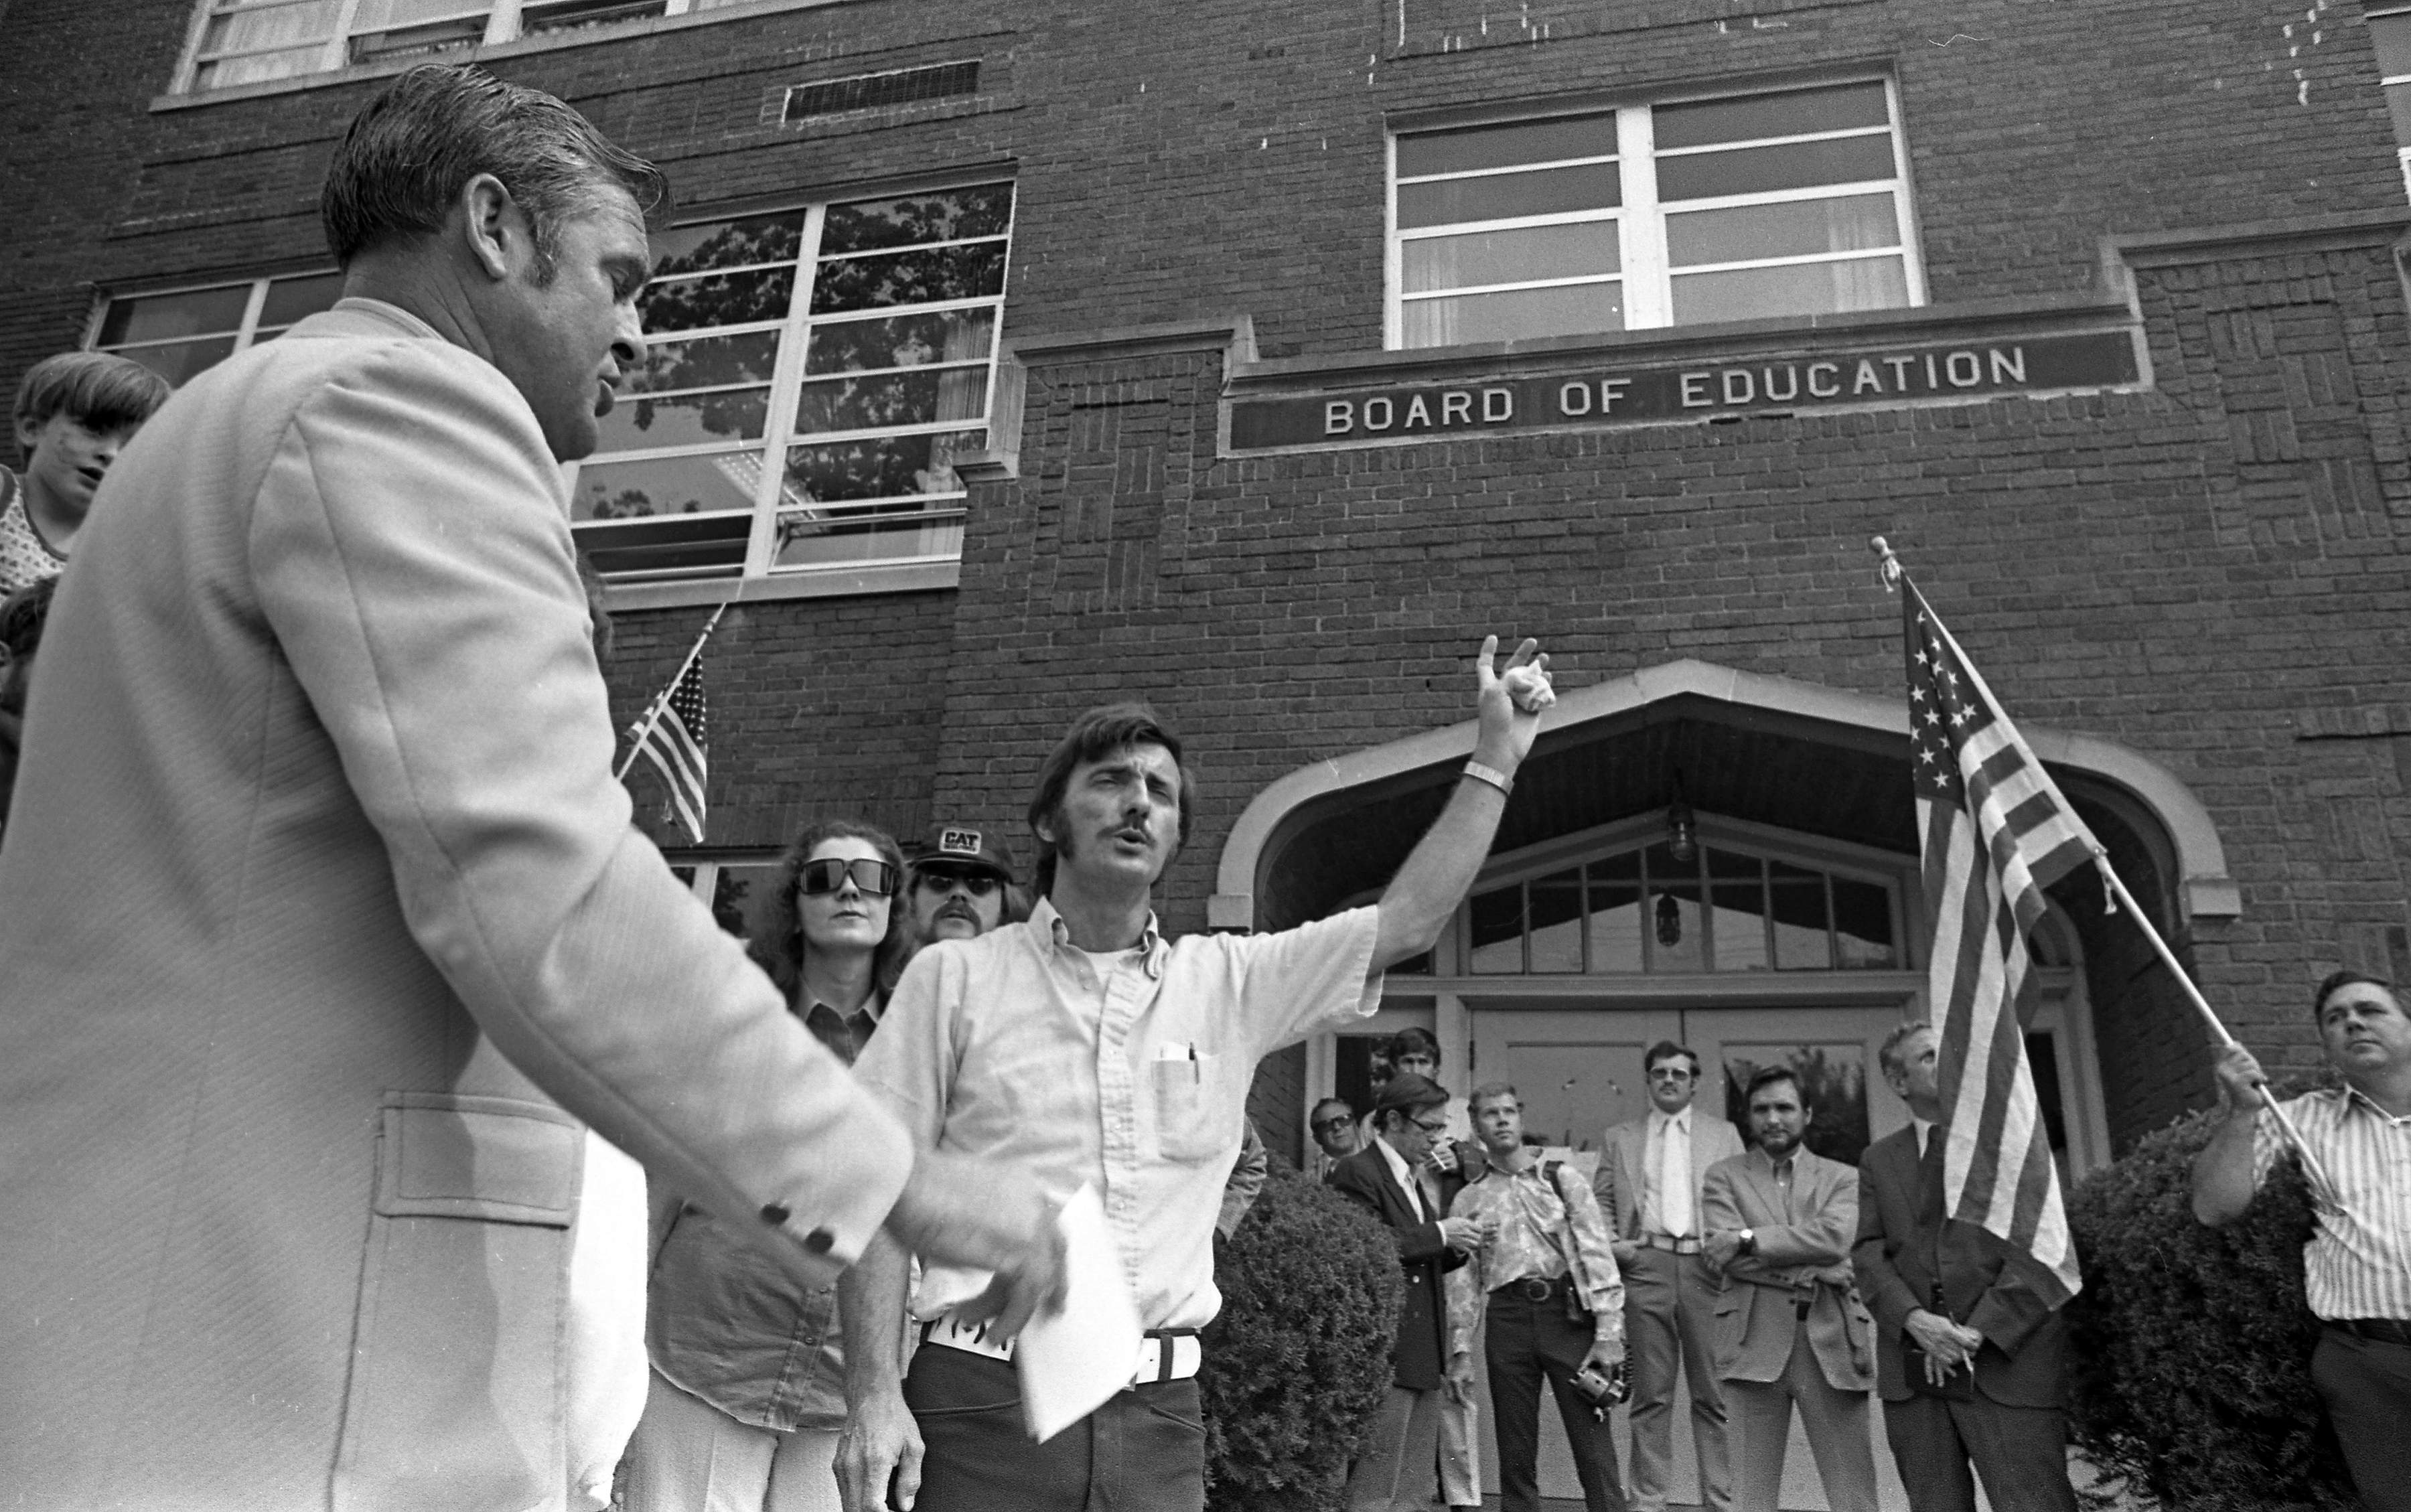 Reverend Avis Hill leads a Sept. 18, 1974 anti-textbook rally outside the Board of Education building in Charleston.  A month later, a bomb exploded under the building's gas meter shortly after a School Board meeting adjourned.